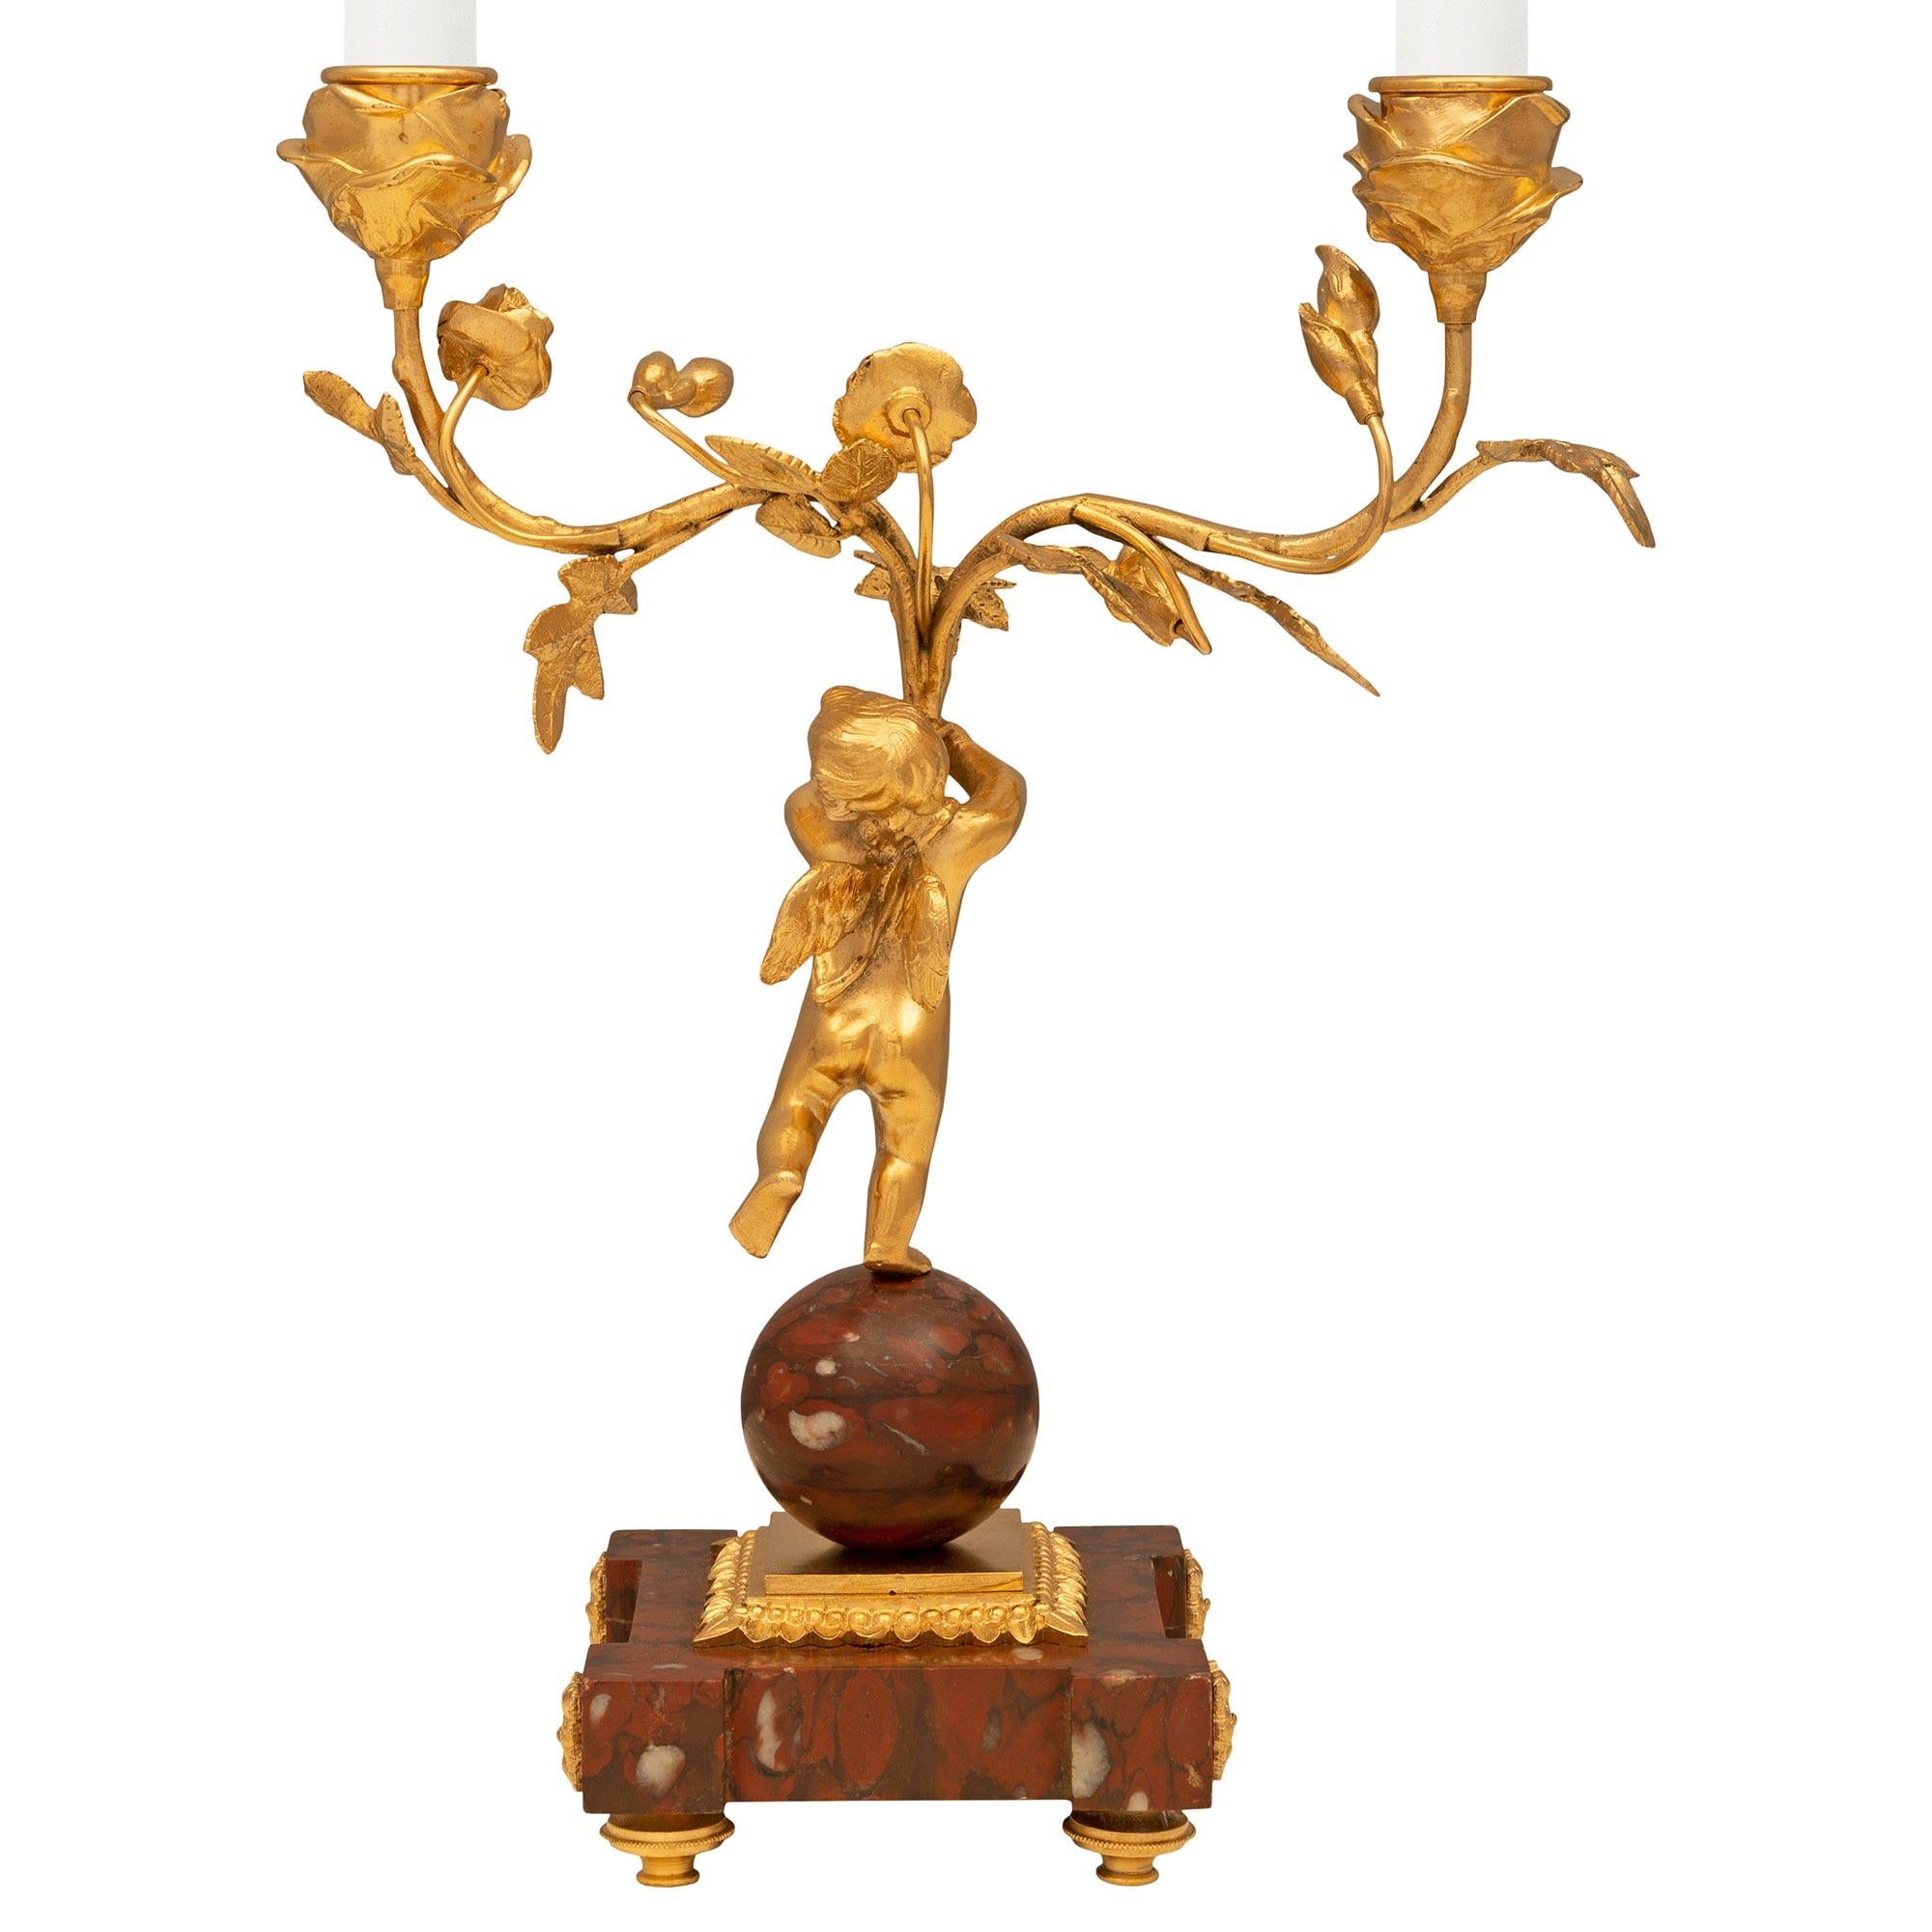 Pair of French 19th Century Elle Époque Period Ormolu and Marble Candelabras For Sale 1